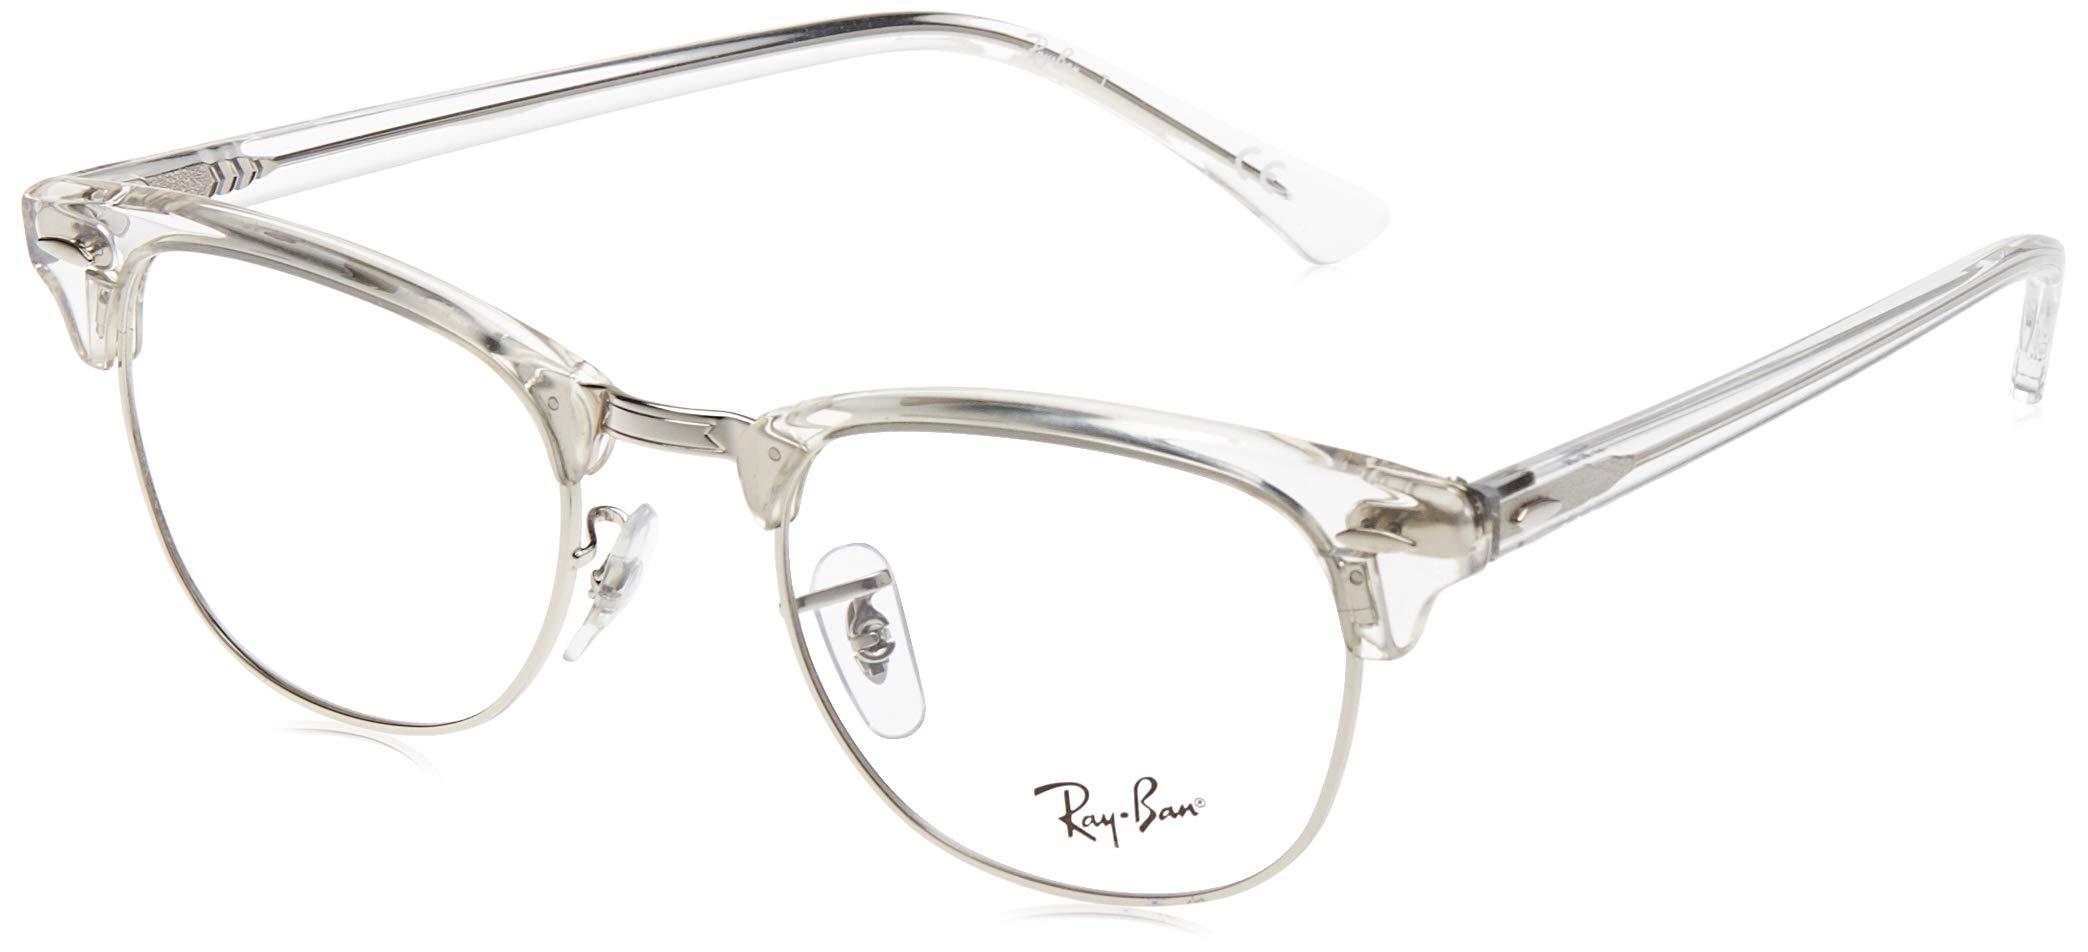 Ray-Ban 0rx 5154 2001 51 Optical Frames in White Transparent (White) - Lyst